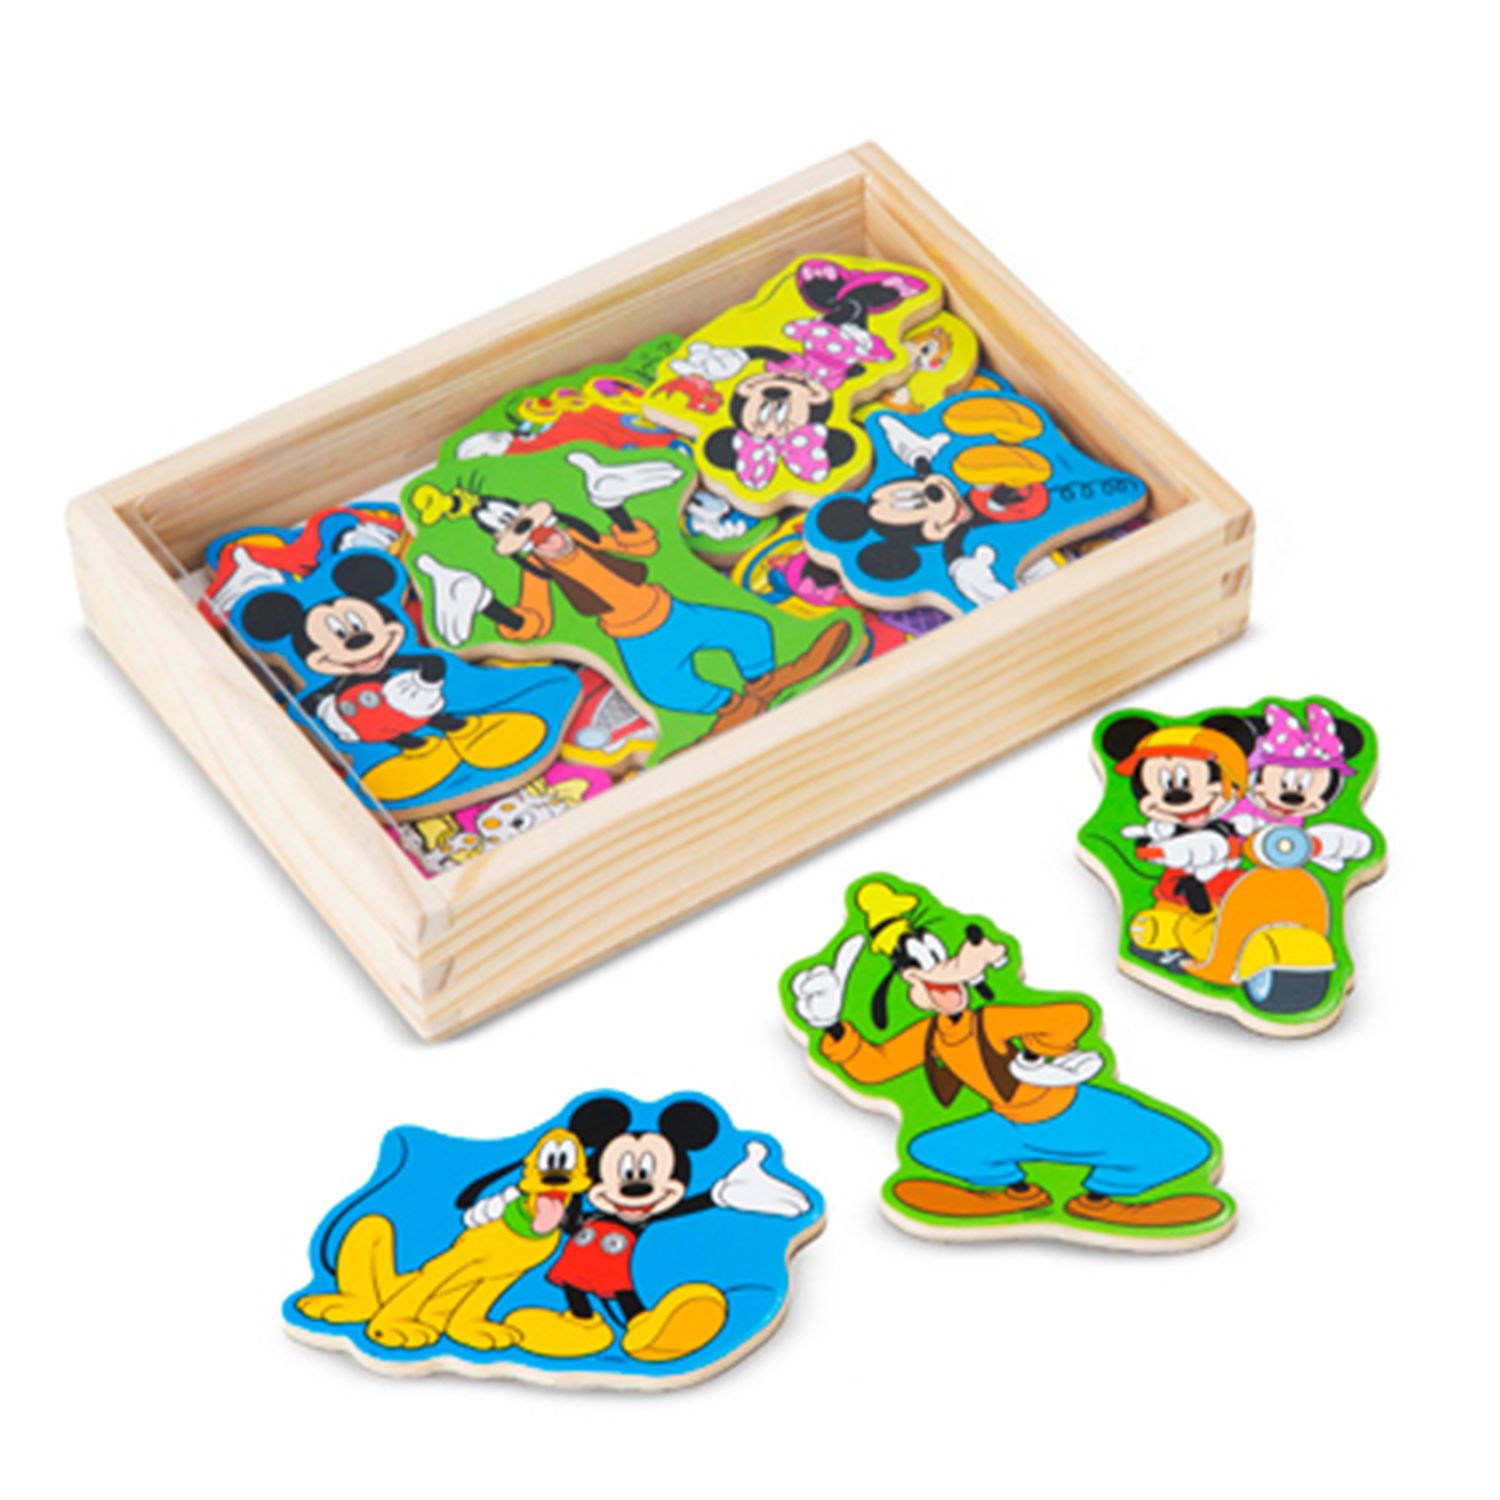 melissa and doug mickey mouse magnets